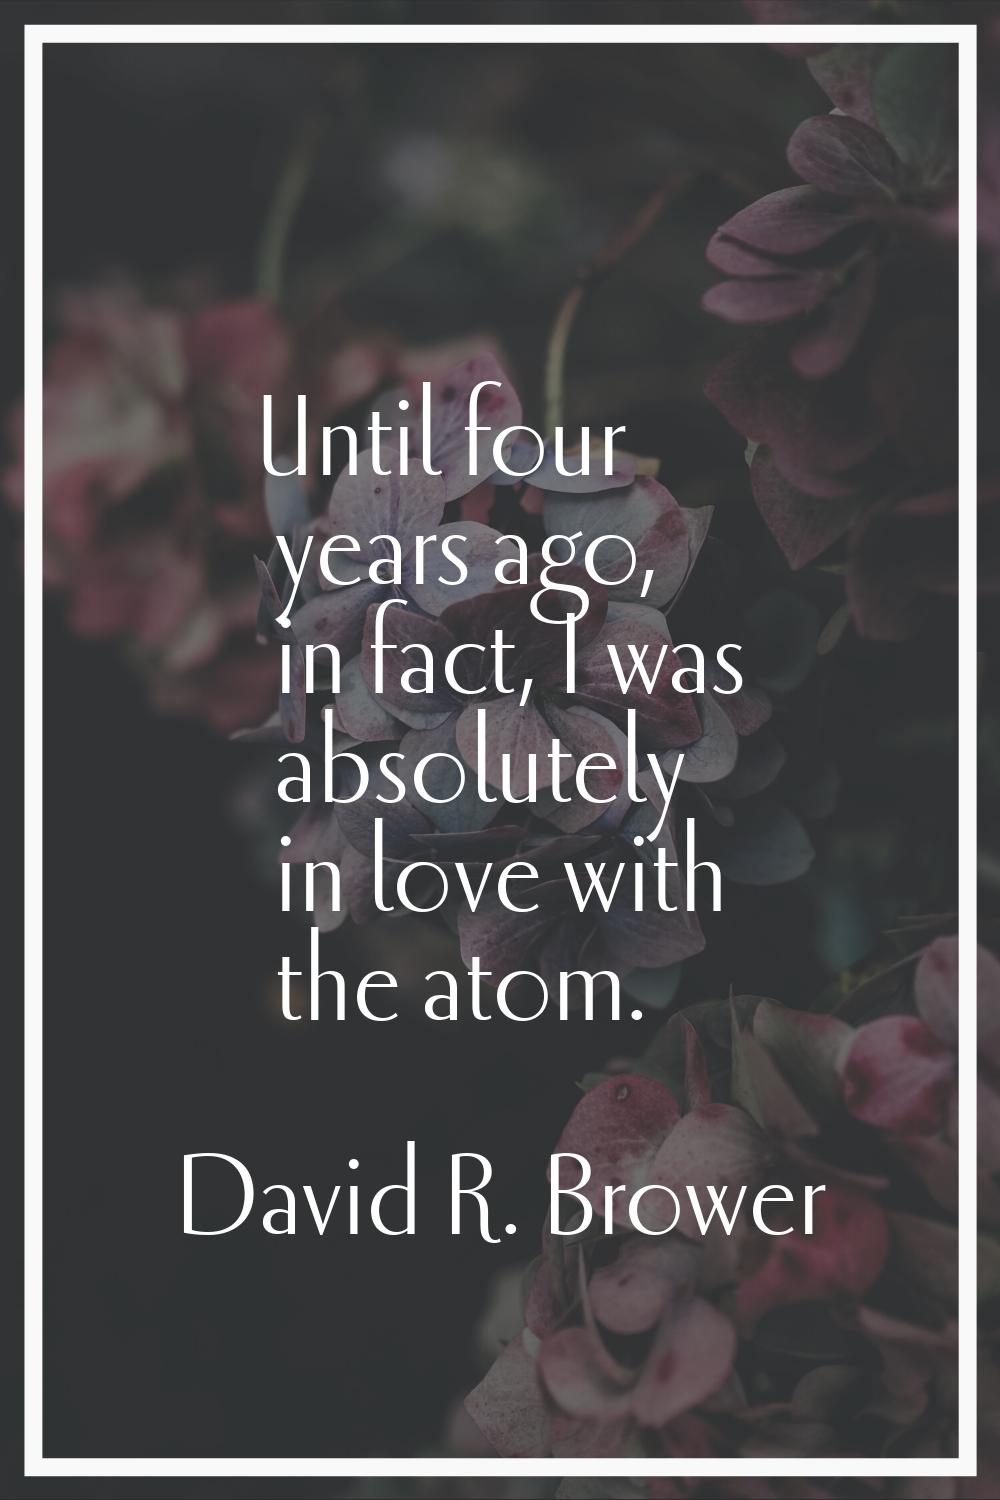 Until four years ago, in fact, I was absolutely in love with the atom.